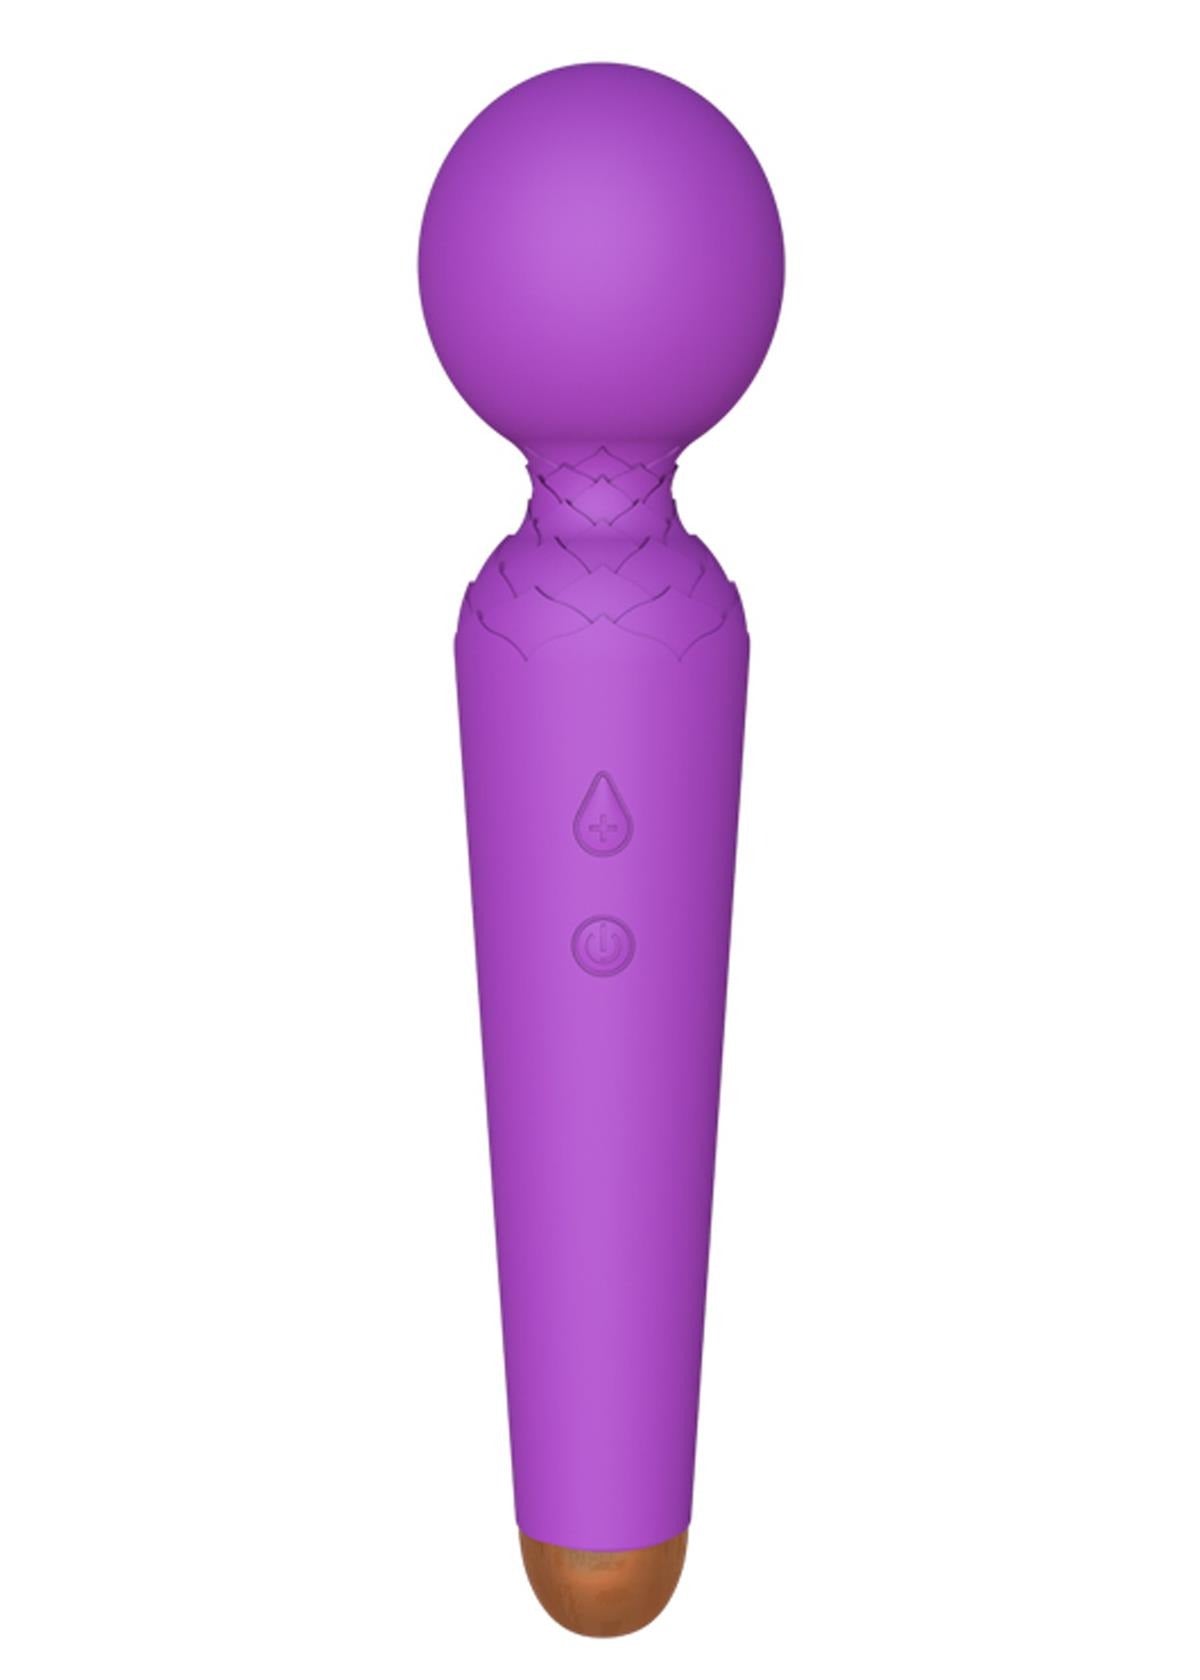 Bossoftoys - 22-00050 - Power wand Massager vibrator - 10 Functions - Silicone - 19,5 cm -  dia 4 cm - Rechargeable - attractive Colour windowbox - Purple